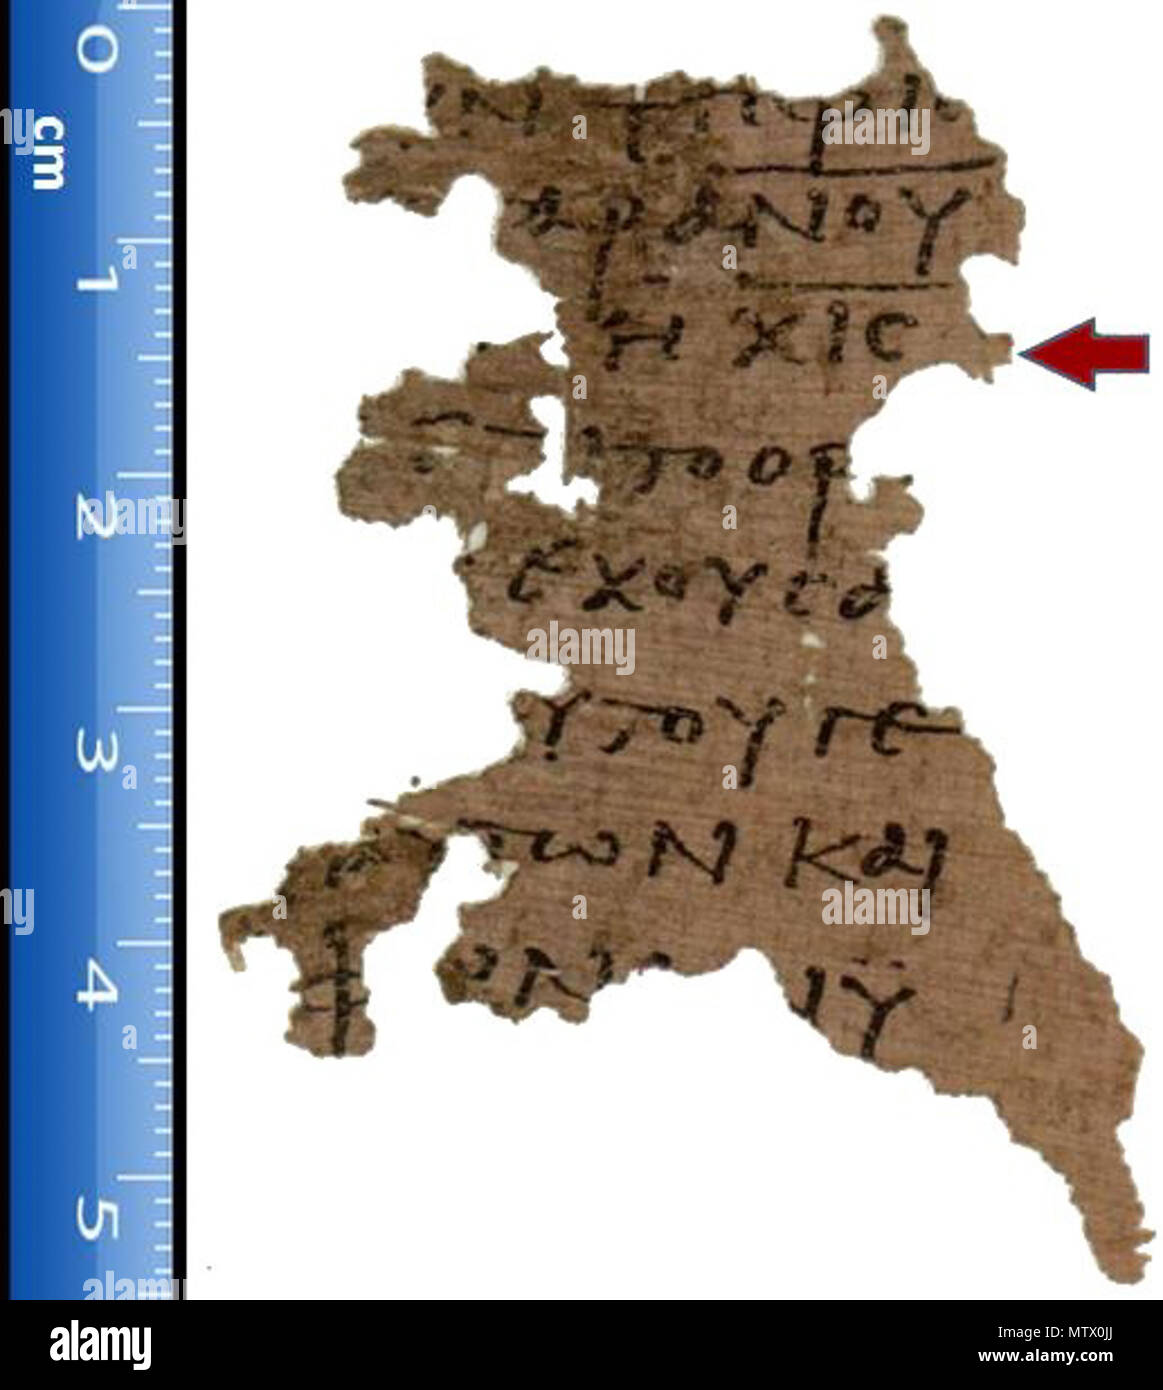 . Oxyrhynchus Papyri 4499/P115. This volume of Oxyrhynchus Papyri contains a fragmentary papyrus of Revelation which is the earliest known witness to some sections (late third / early fourth century). One feature of particular interest is the number that this papyrus assigns to the Beast: 616, rather than the usual 666. (665 is also found.) We knew that this variant existed: Irenaeus cites (and refutes) it. But this is the earliest instance that has so far been found. The number — chi, iota, stigma (hexakosiai deka hex) — is in the third line of the fragment shown below. 12 June 2006 (original Stock Photo